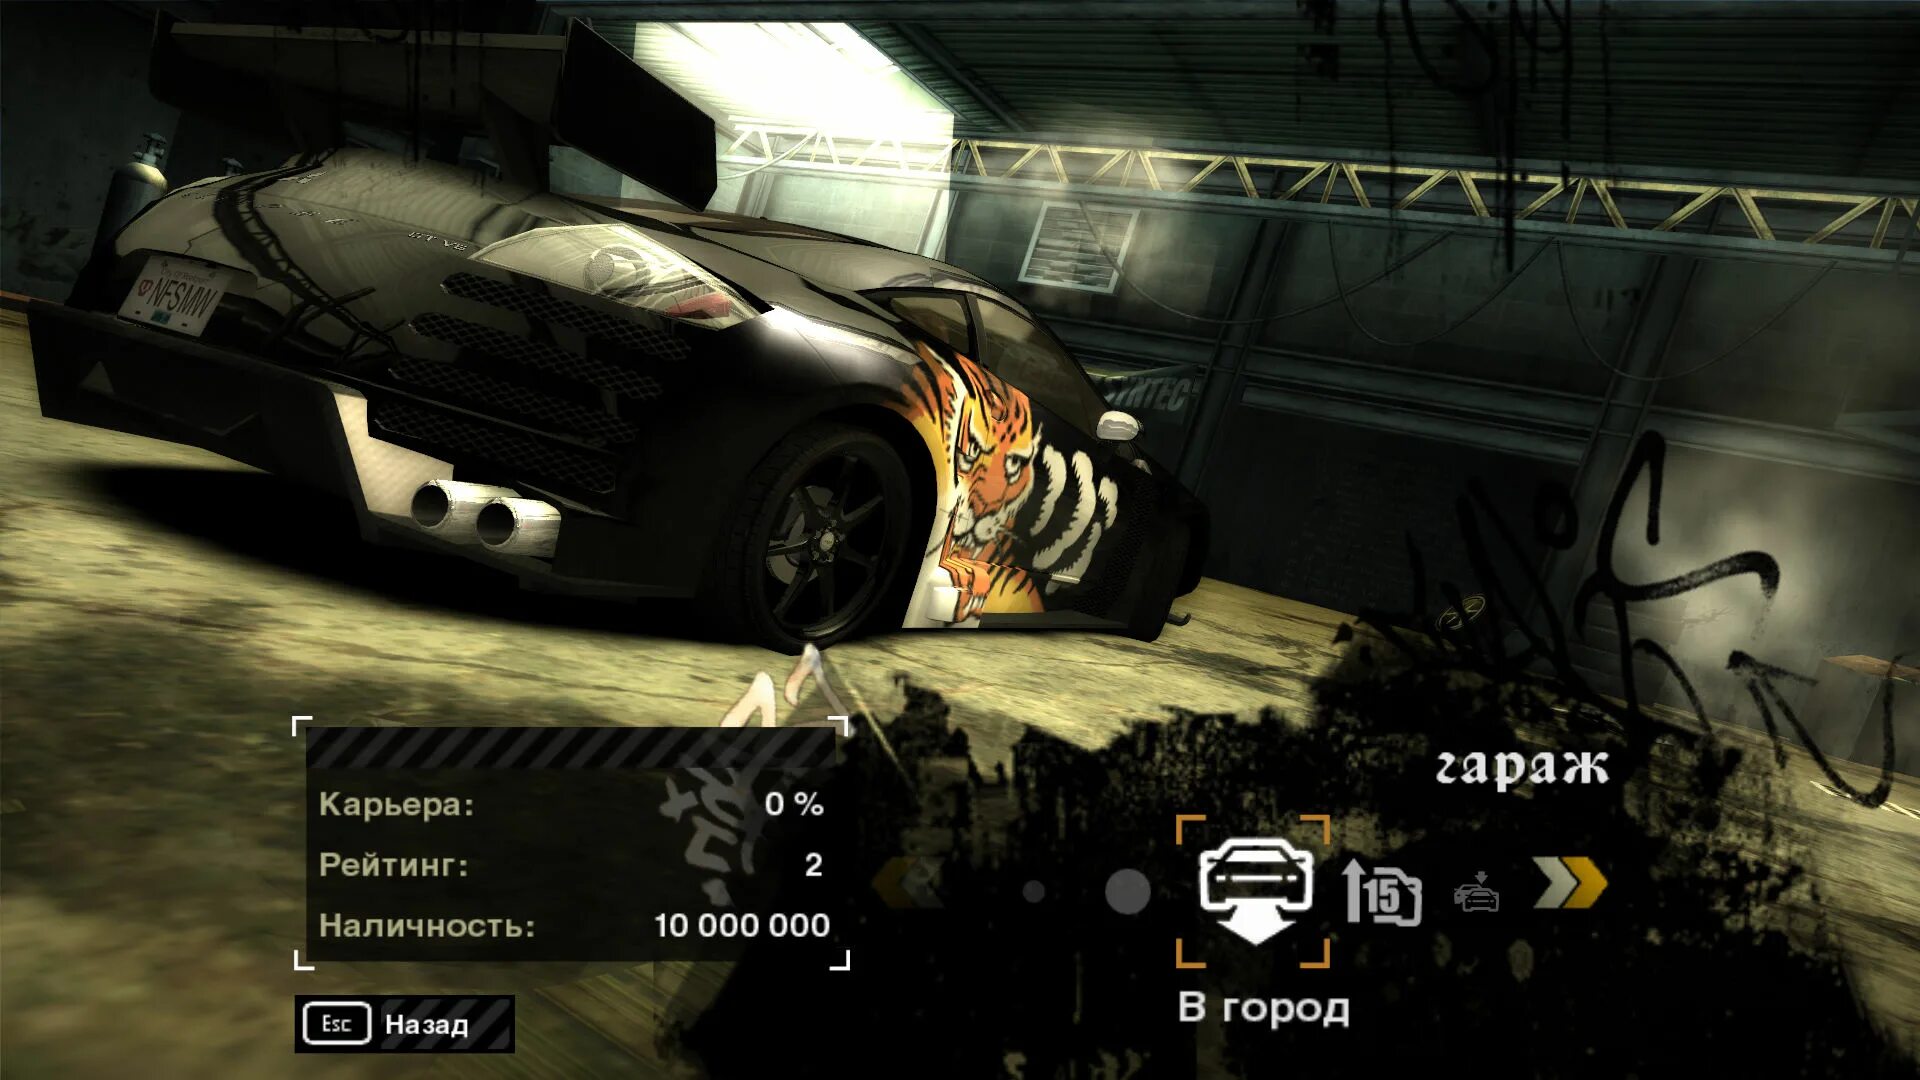 Mitsubishi Eclipse Биг Лу. Need for Speed most wanted 2005 Биг Лу. Митсубиси Эклипс NFS most wanted. Nissan Eclipse Биг Лу.